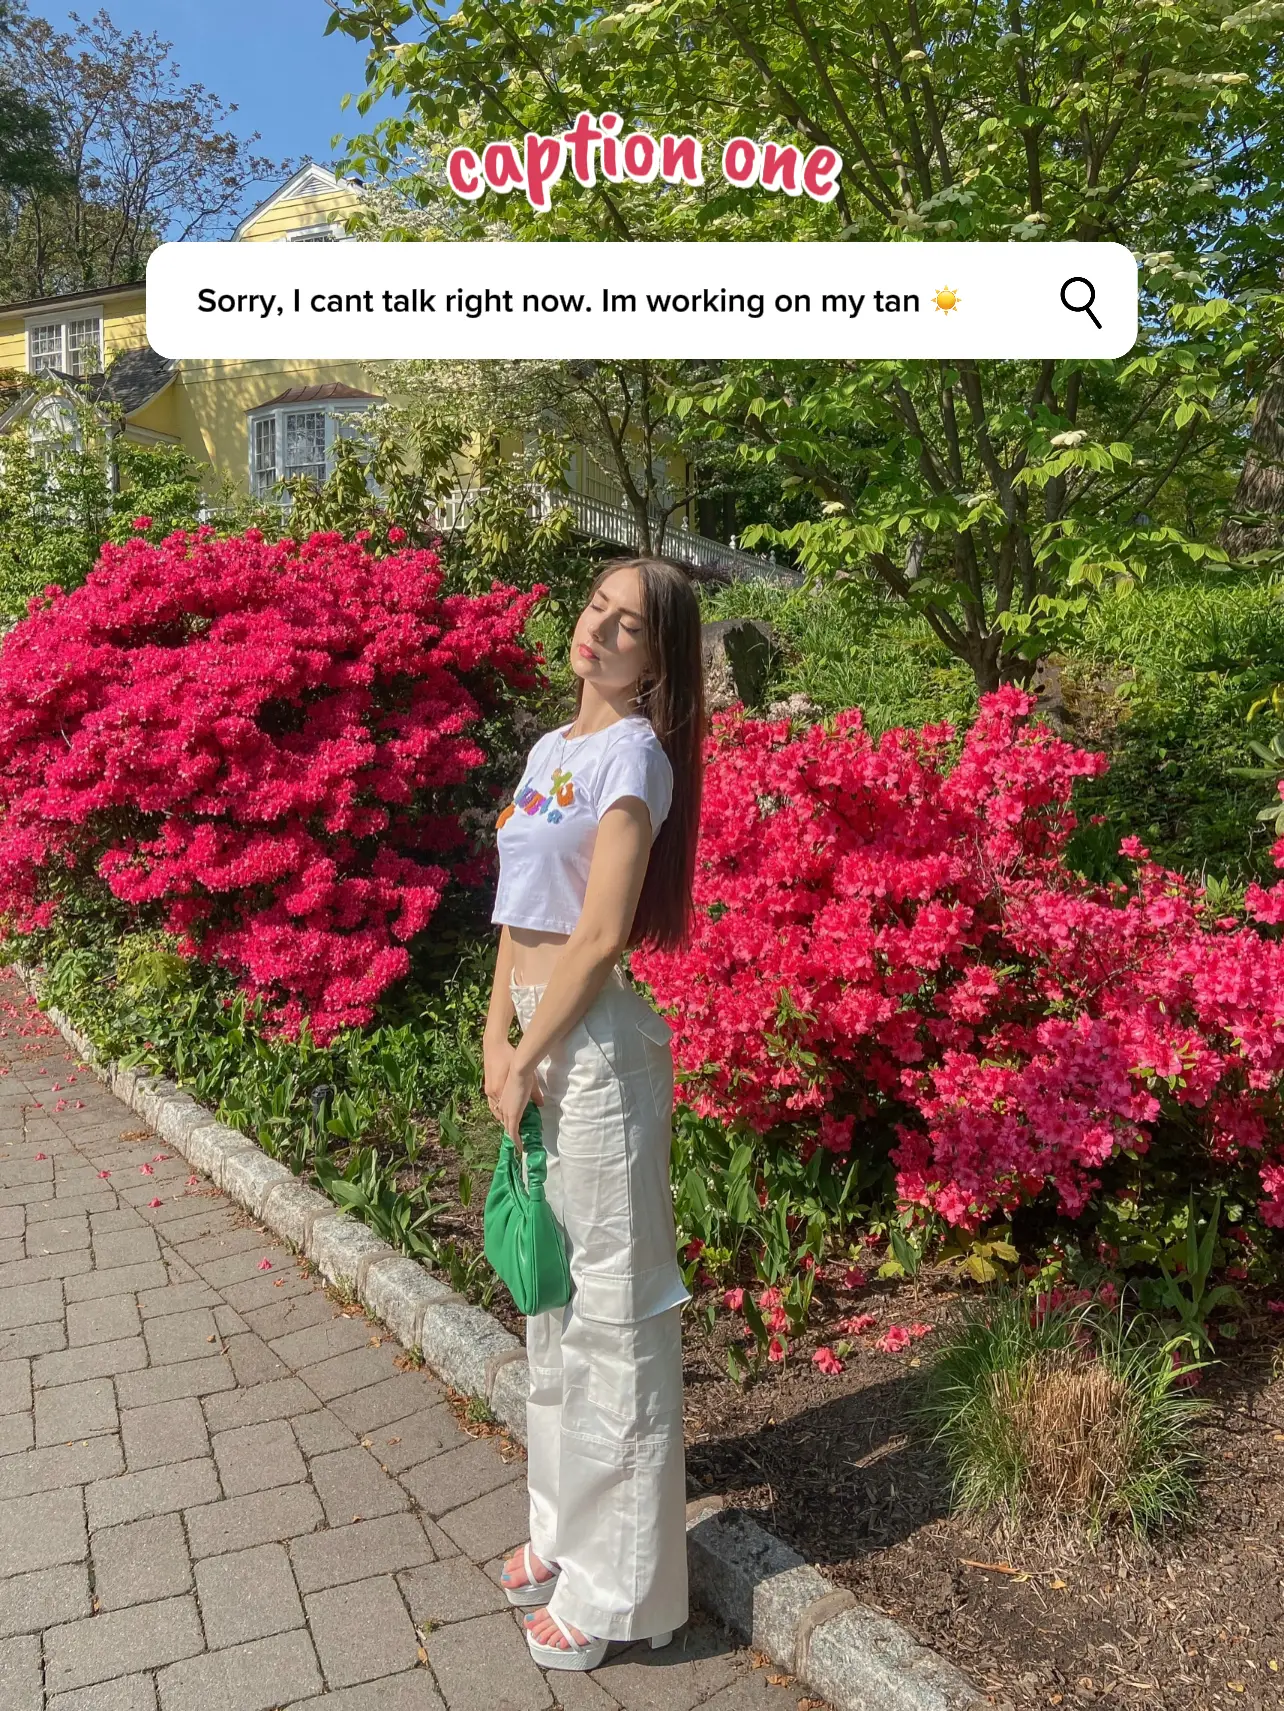  A woman in a white shirt and jeans is standing in front of a flower bed.